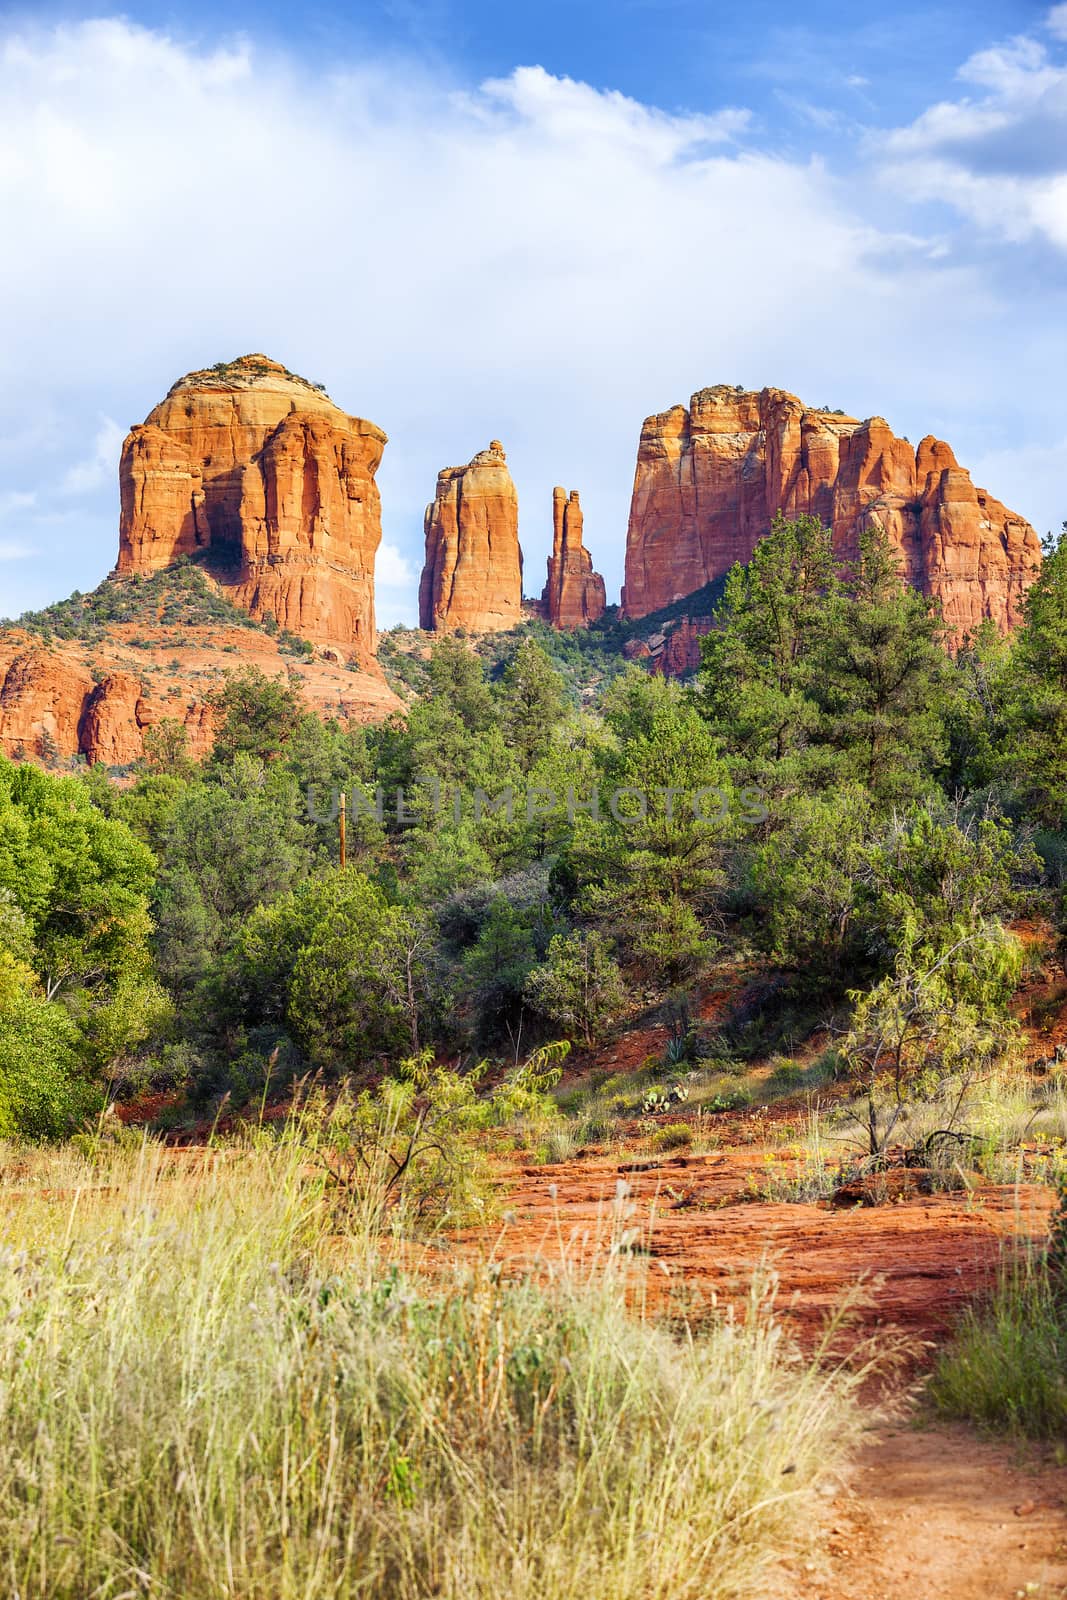 View of sunset at cathedral rock sedona 